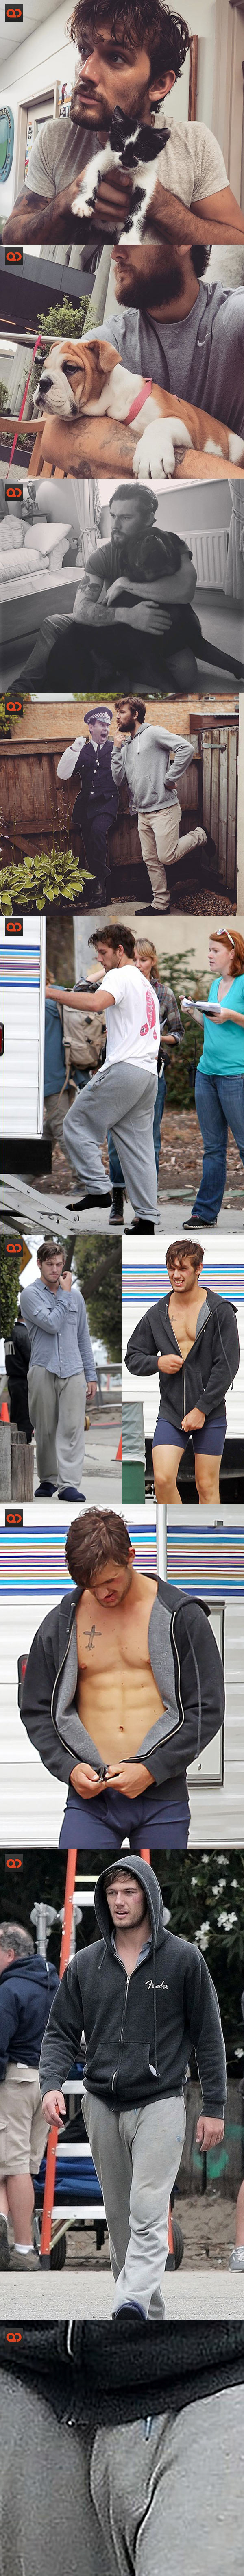 Alex Pettyfer, Magic Mike Actor, Parades A Huge Bulge At The Park!